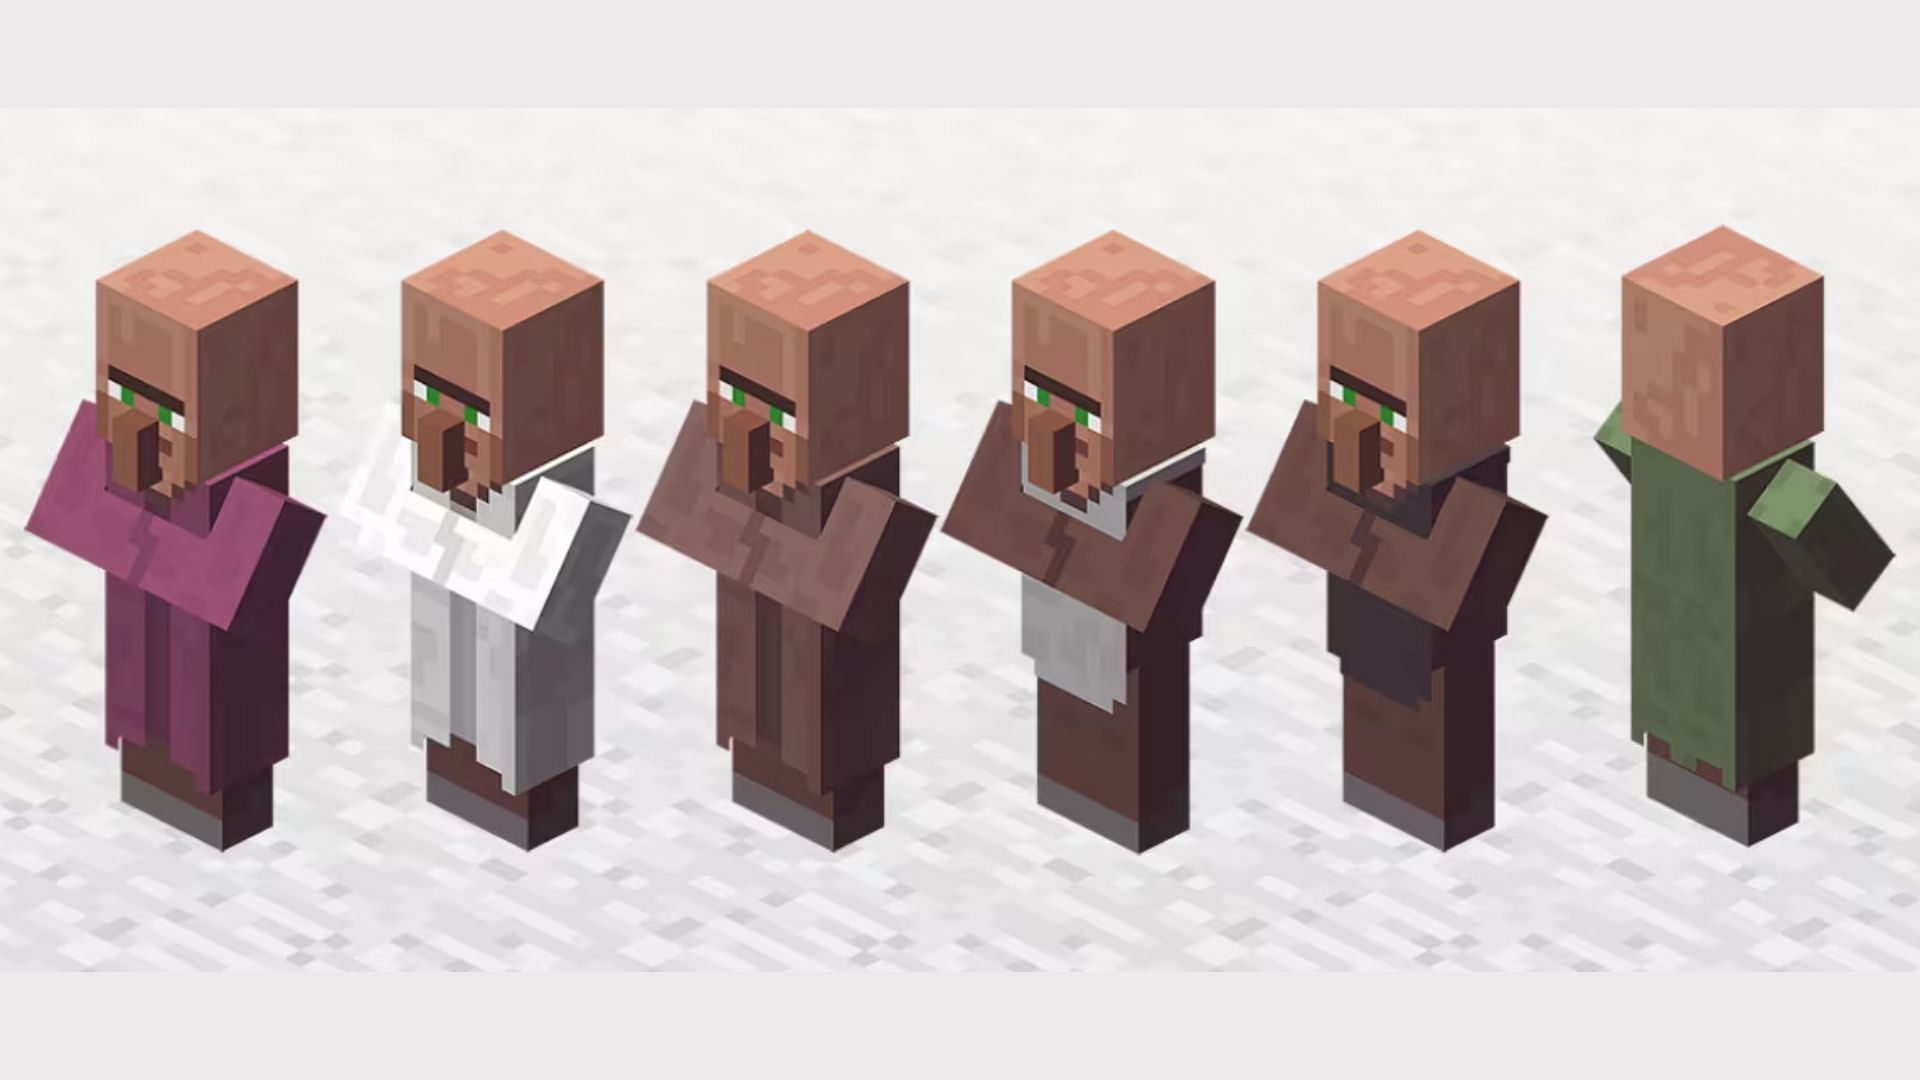 Testificates were just the villagers in the game&#039;s early release (Image via Mojang Studios)